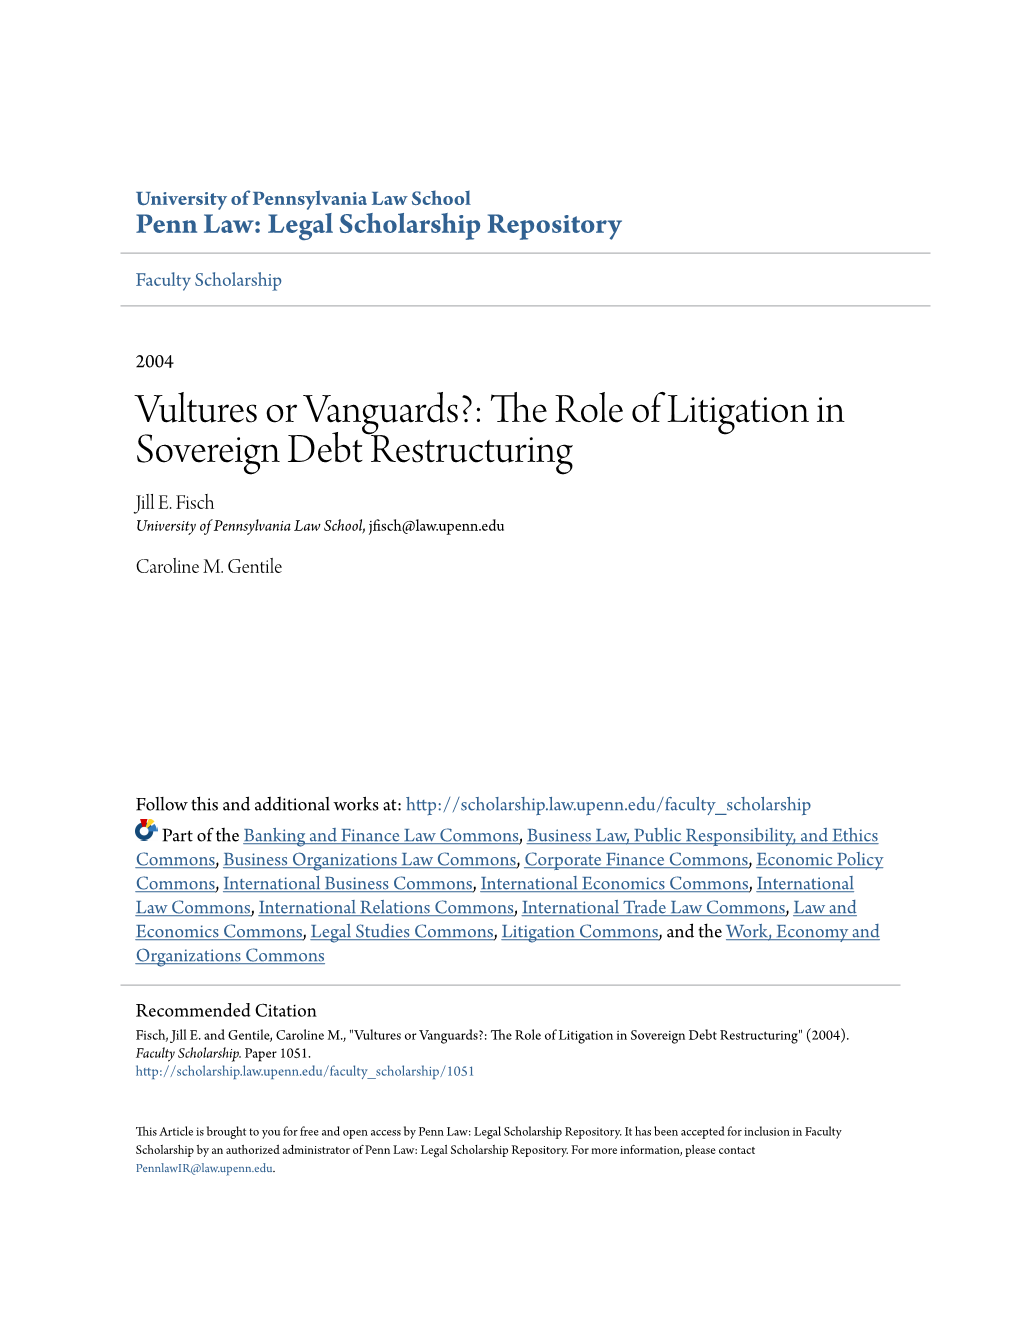 The Role of Litigation in Sovereign Debt Restructuring Jill E